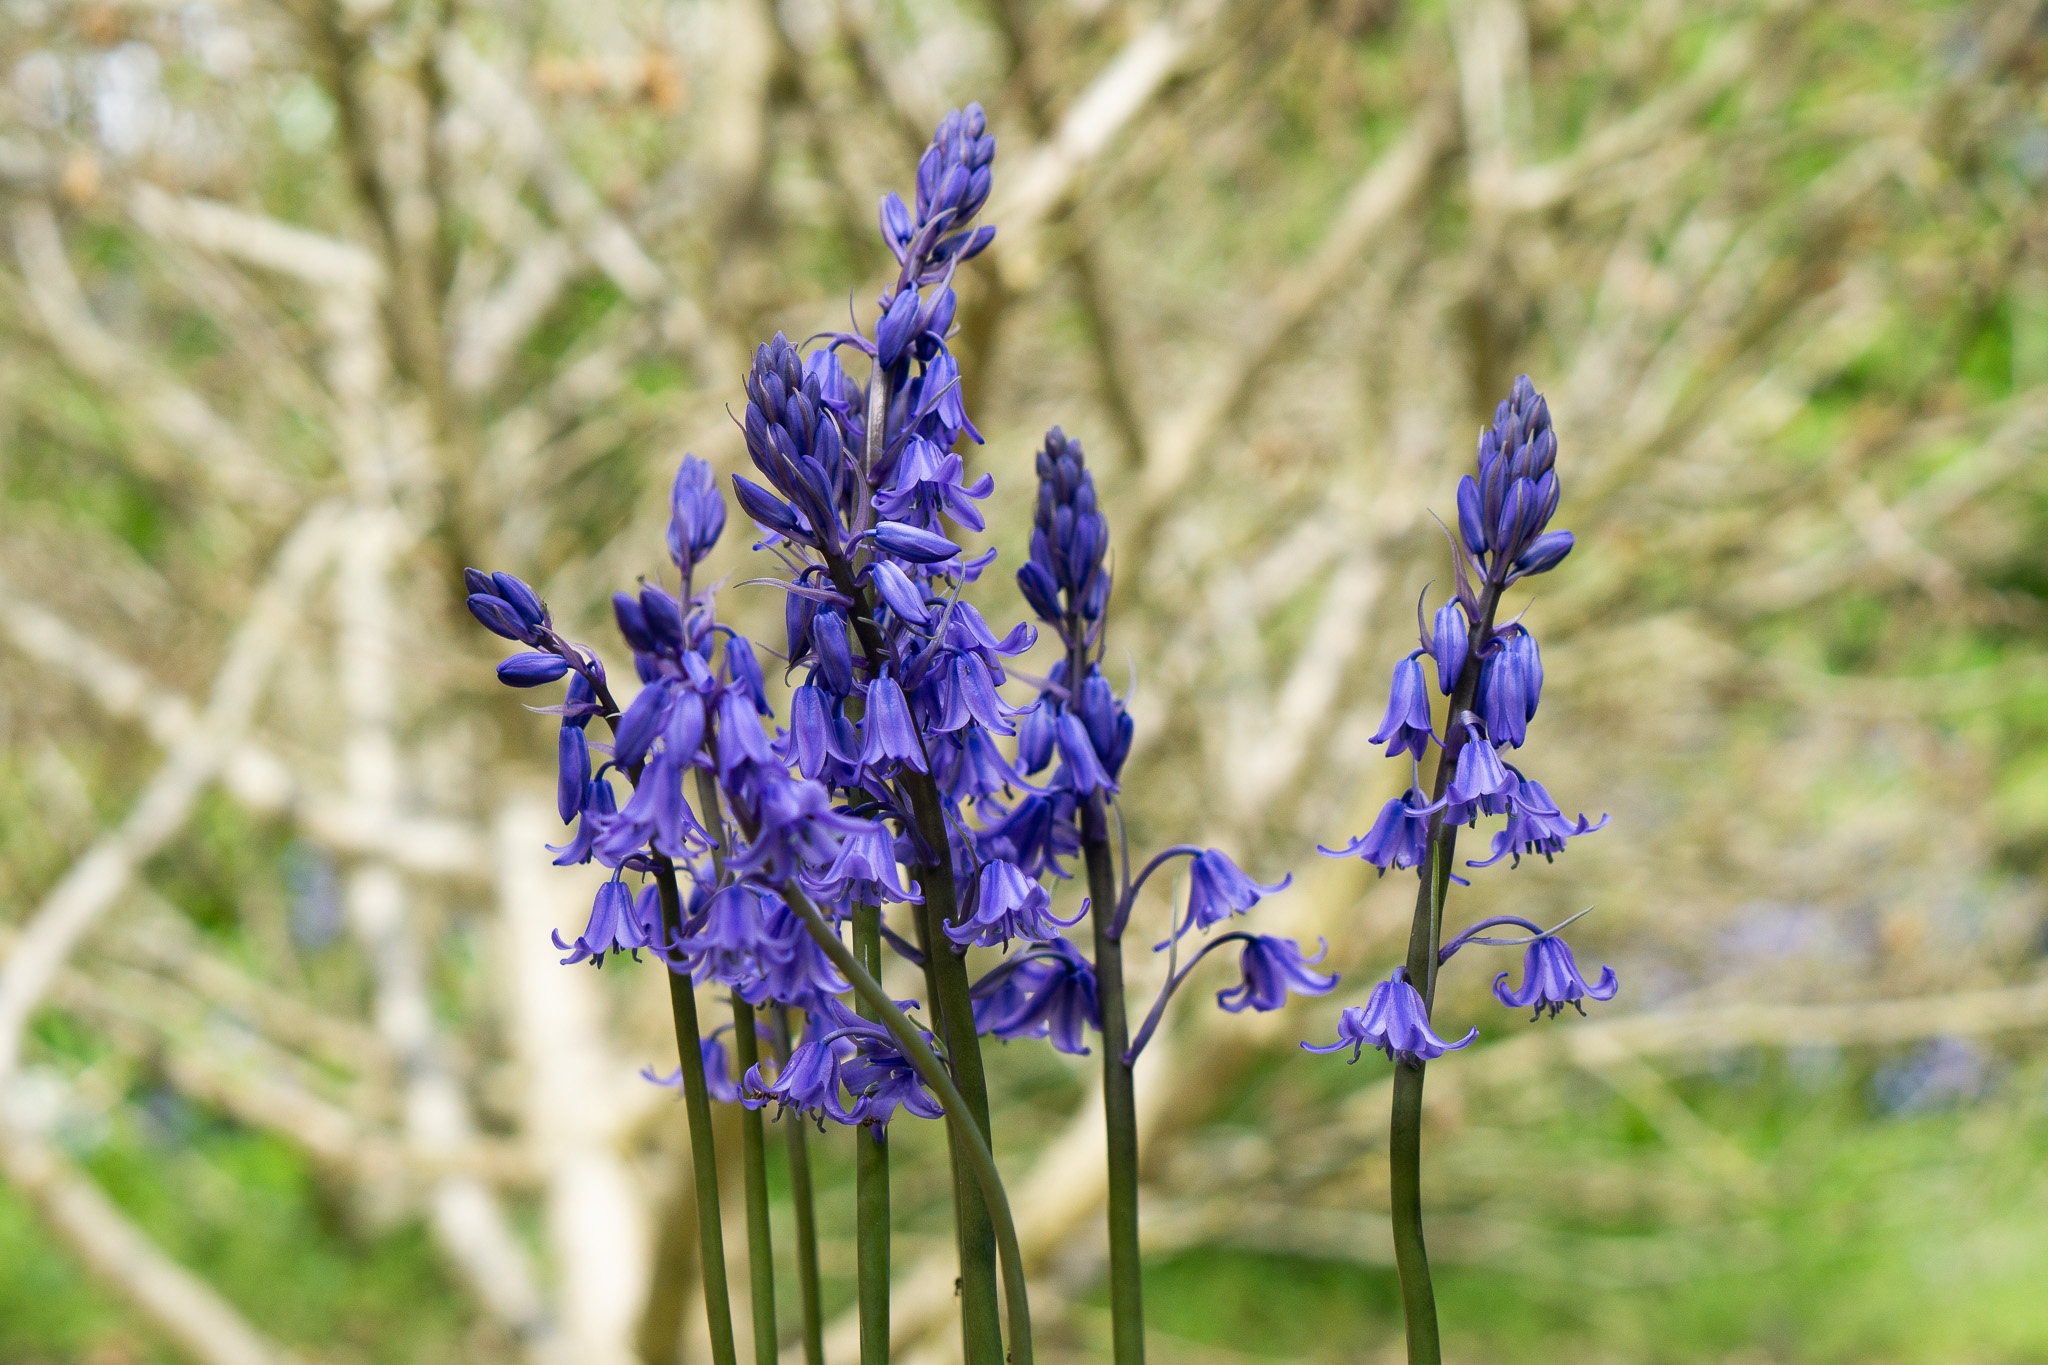 Spanish bluebells by the MTC